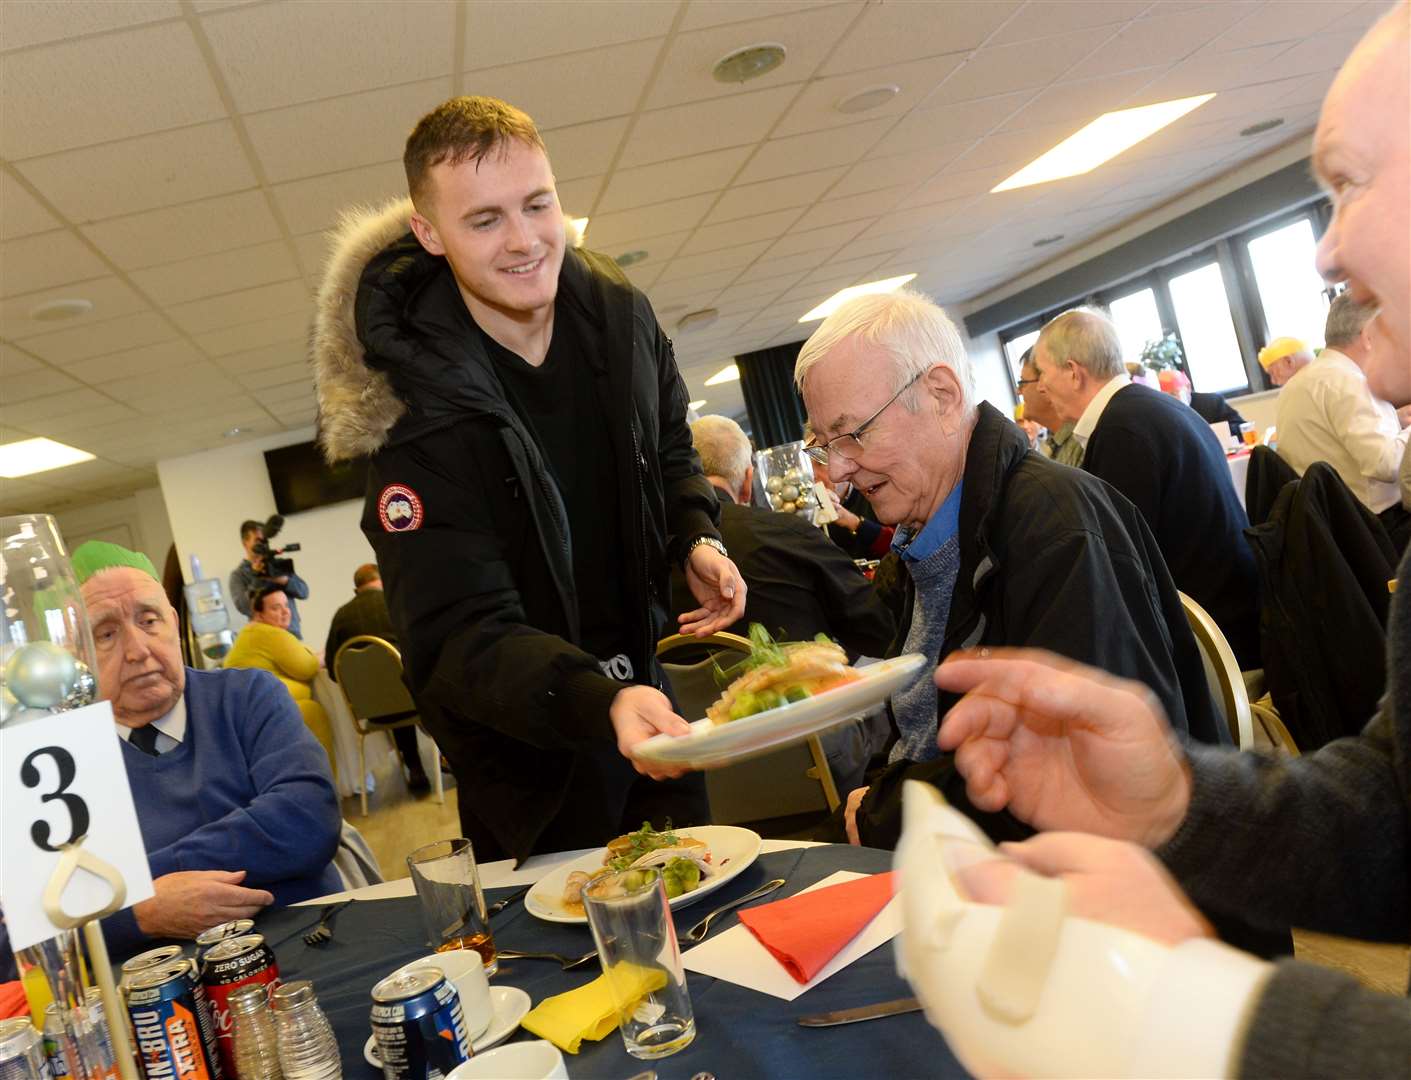 Inverness Caledonian Thistle hold a Festive Friends Christmas meal. Mich Currie helps out with serving the meals. Picture: Gary Anthony.